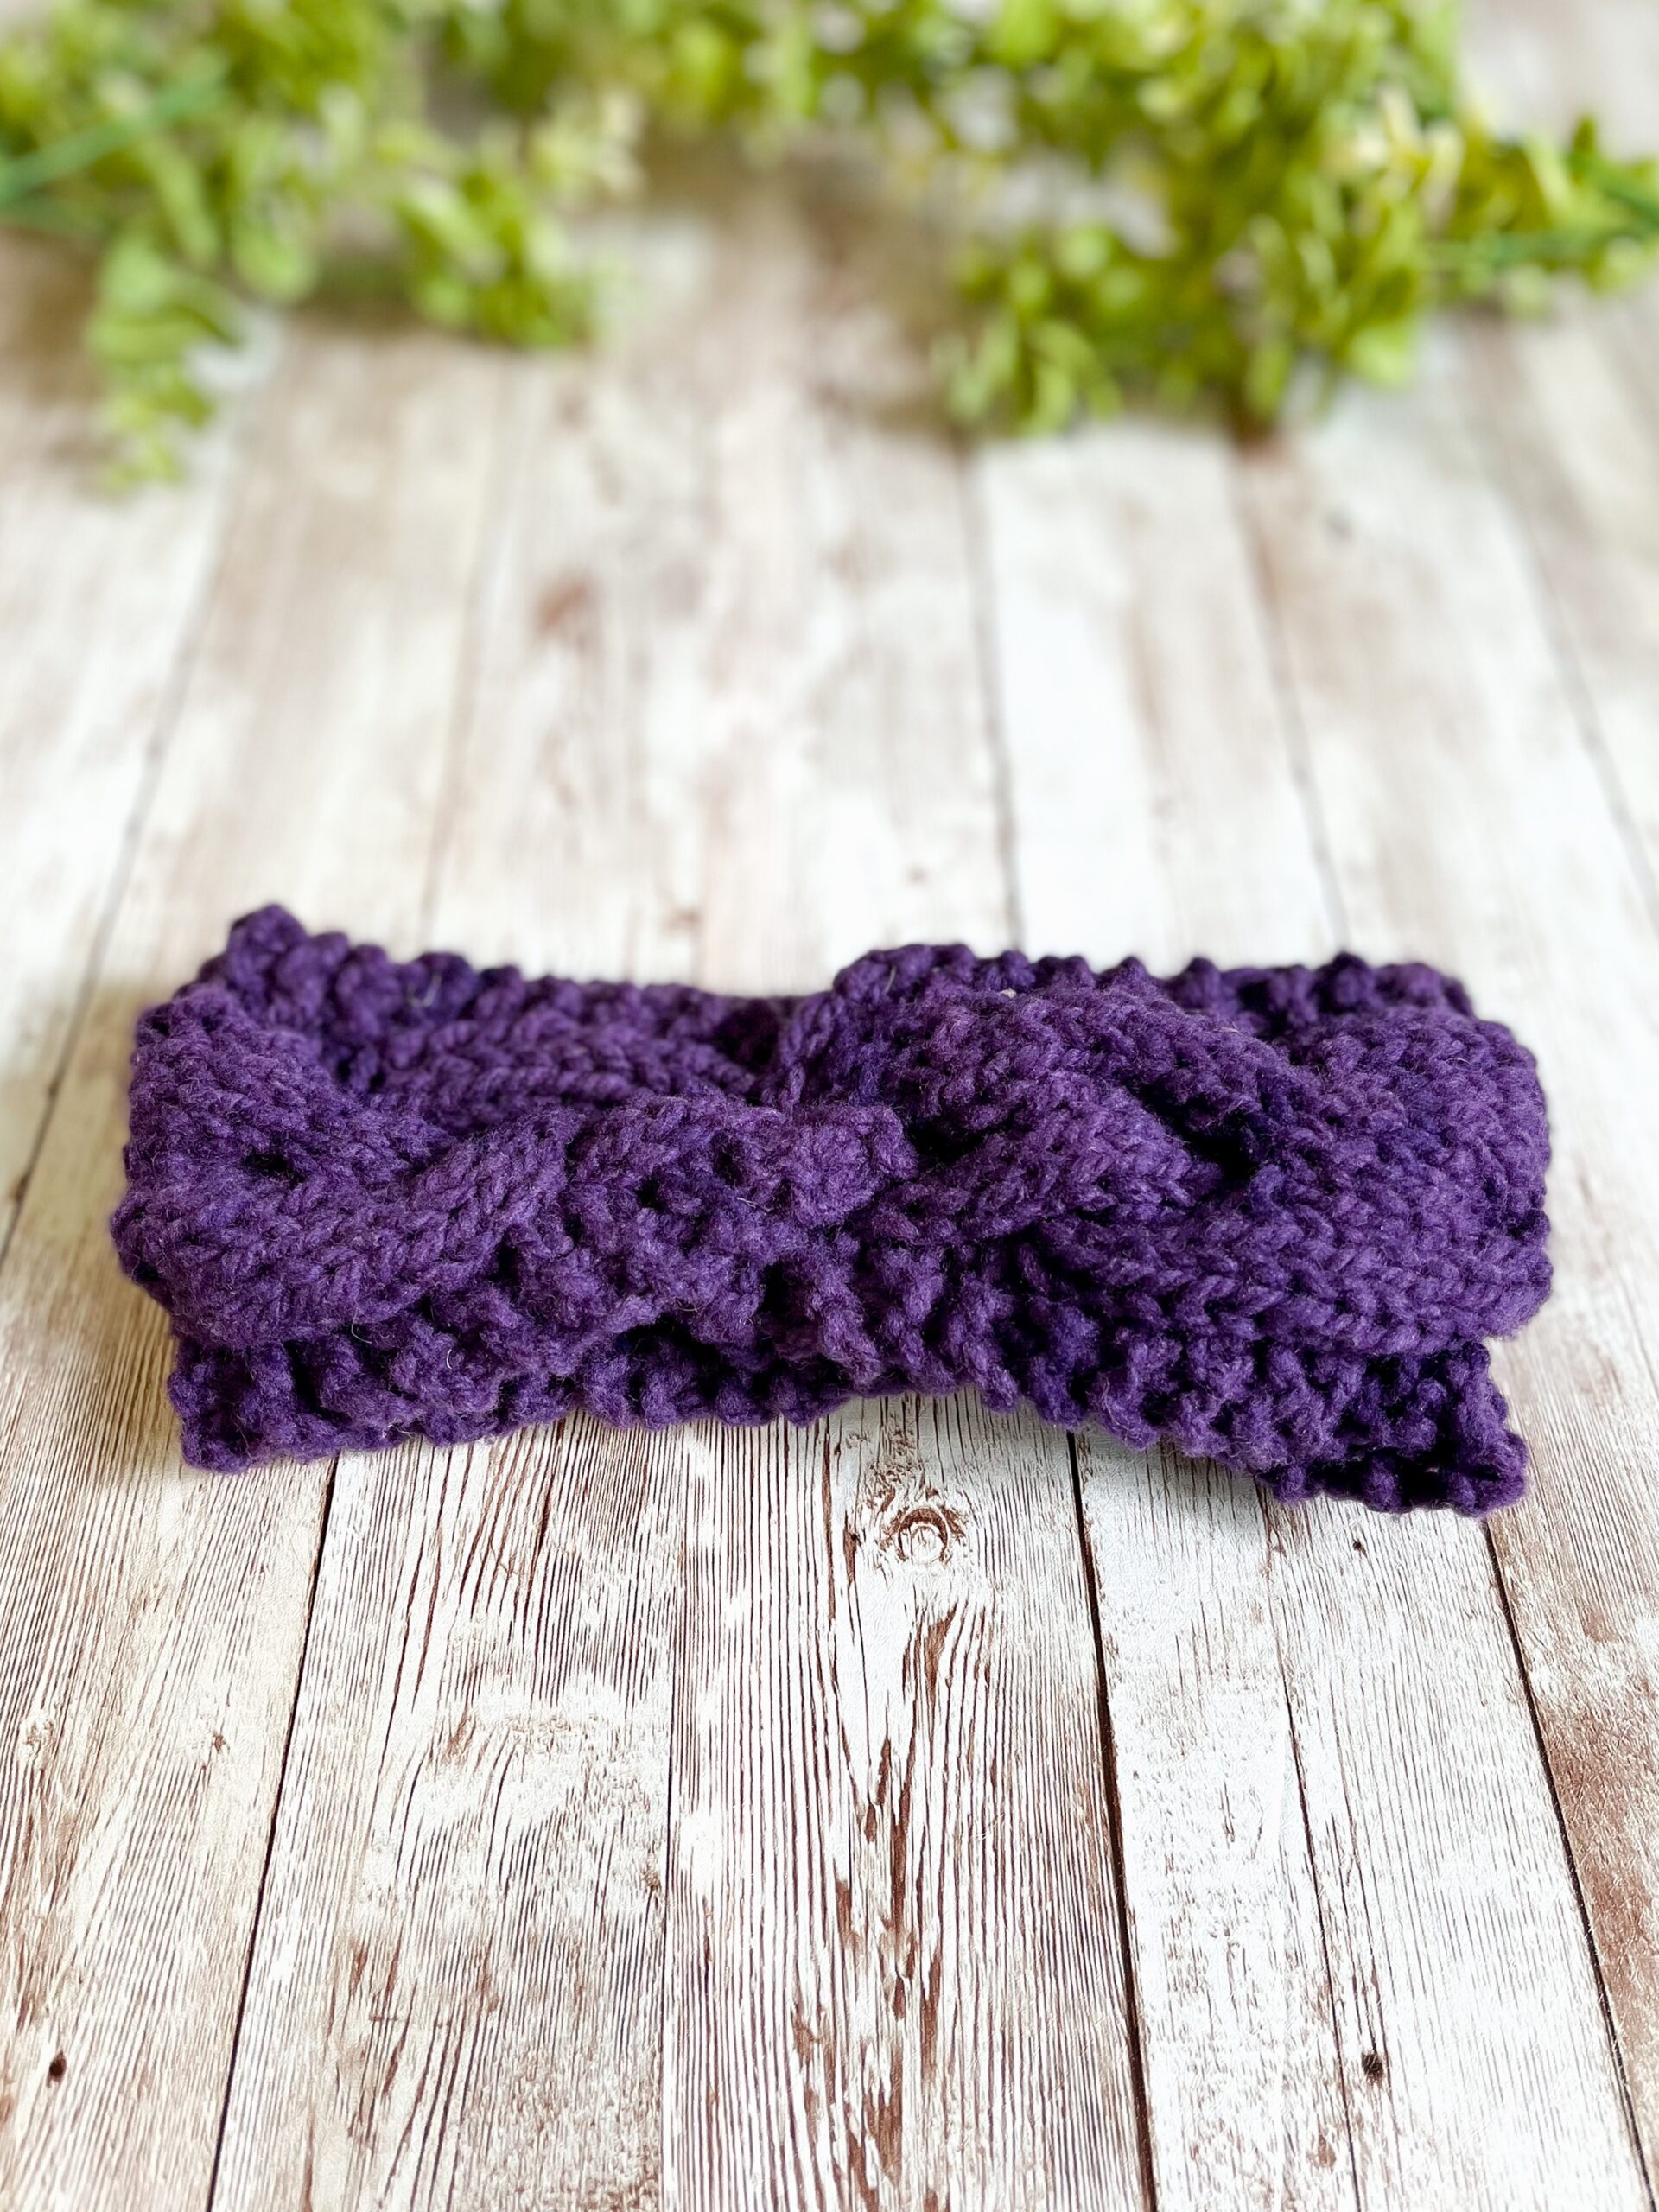 A purple, Virginia-raised merino ear warmer rests on a wood plank with greenery in the background